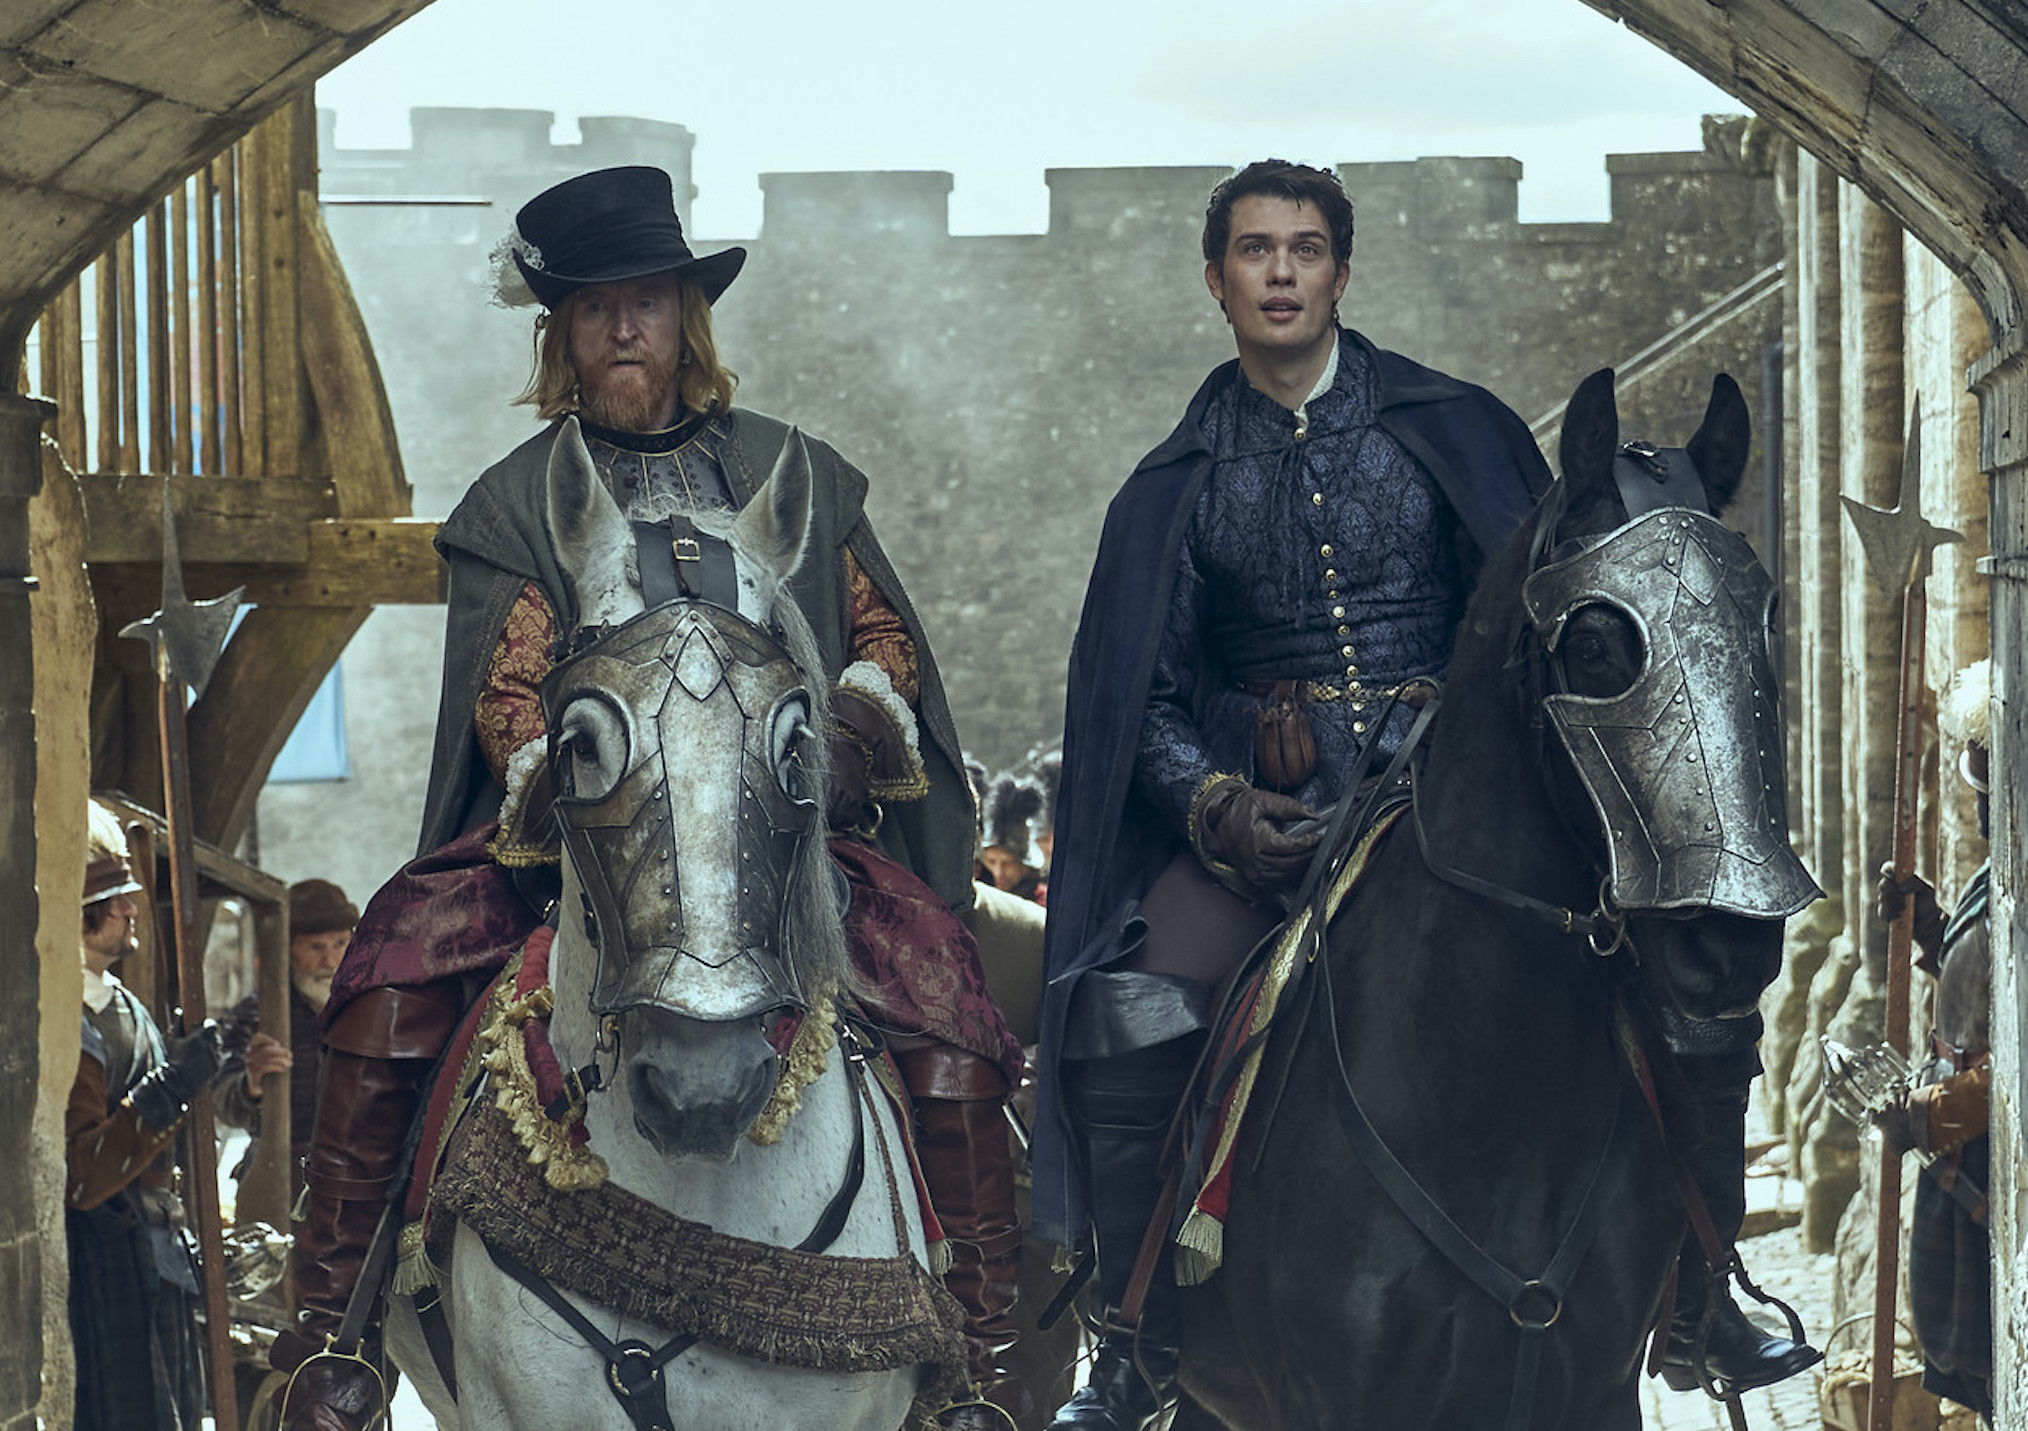 Tony Curran as King James I, Nicholas Galitzine as George Villiers in 'Mary & George' Episode 4 - 'The Wolf & The Lamb'